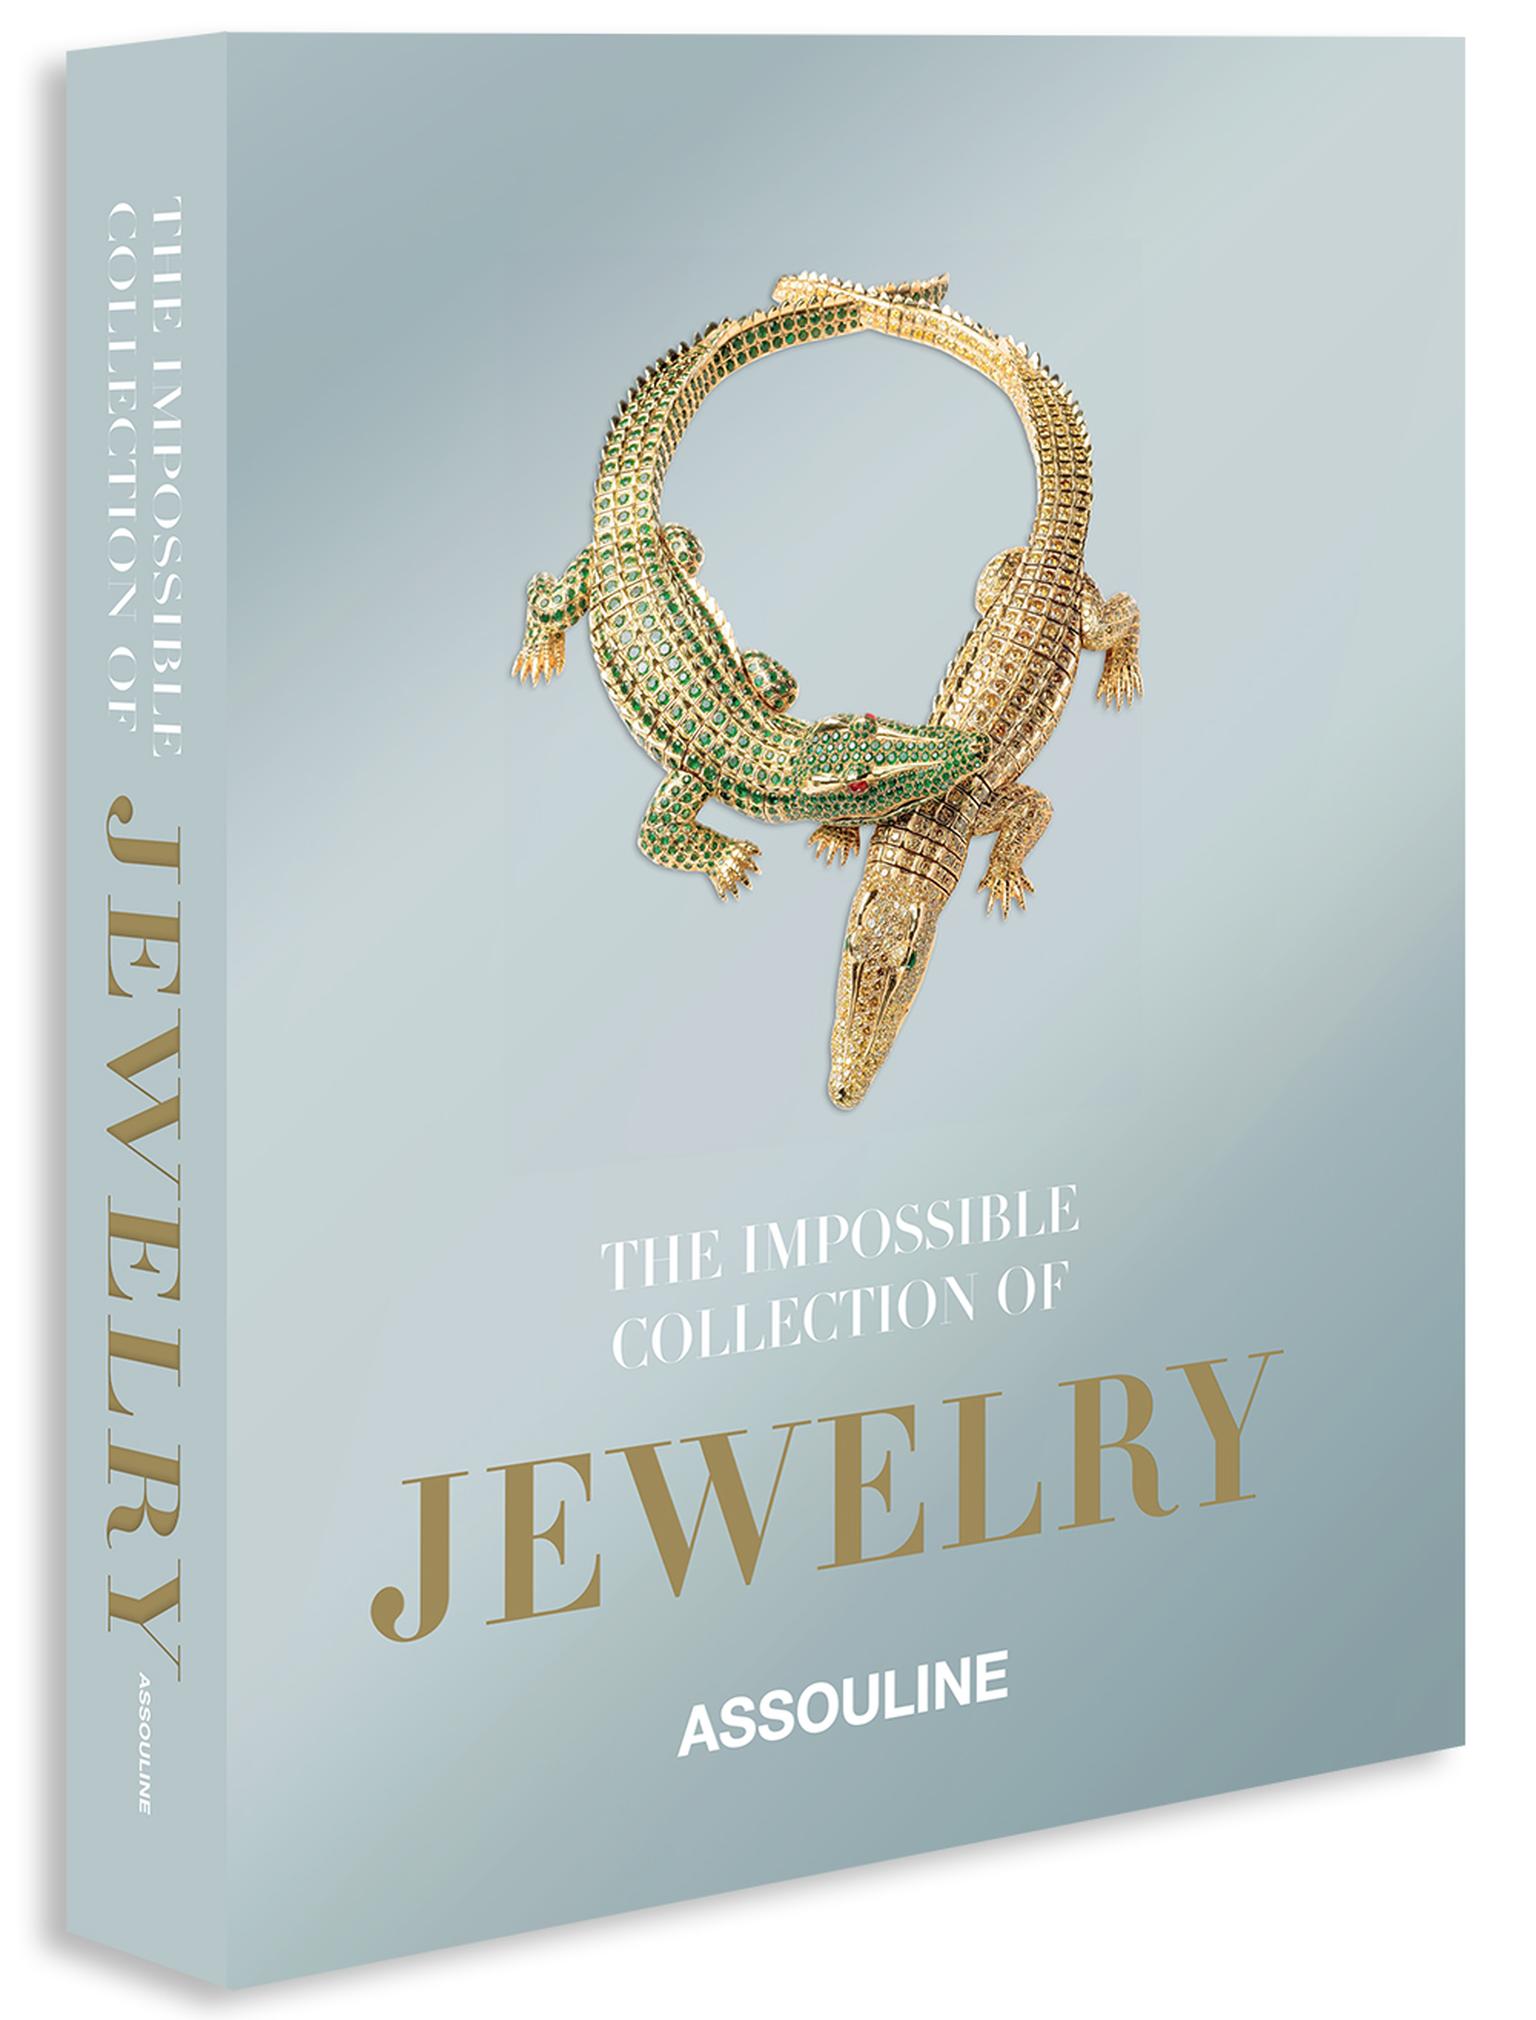 AssoulineImpssibleCollectionofJewelryCover.jpg